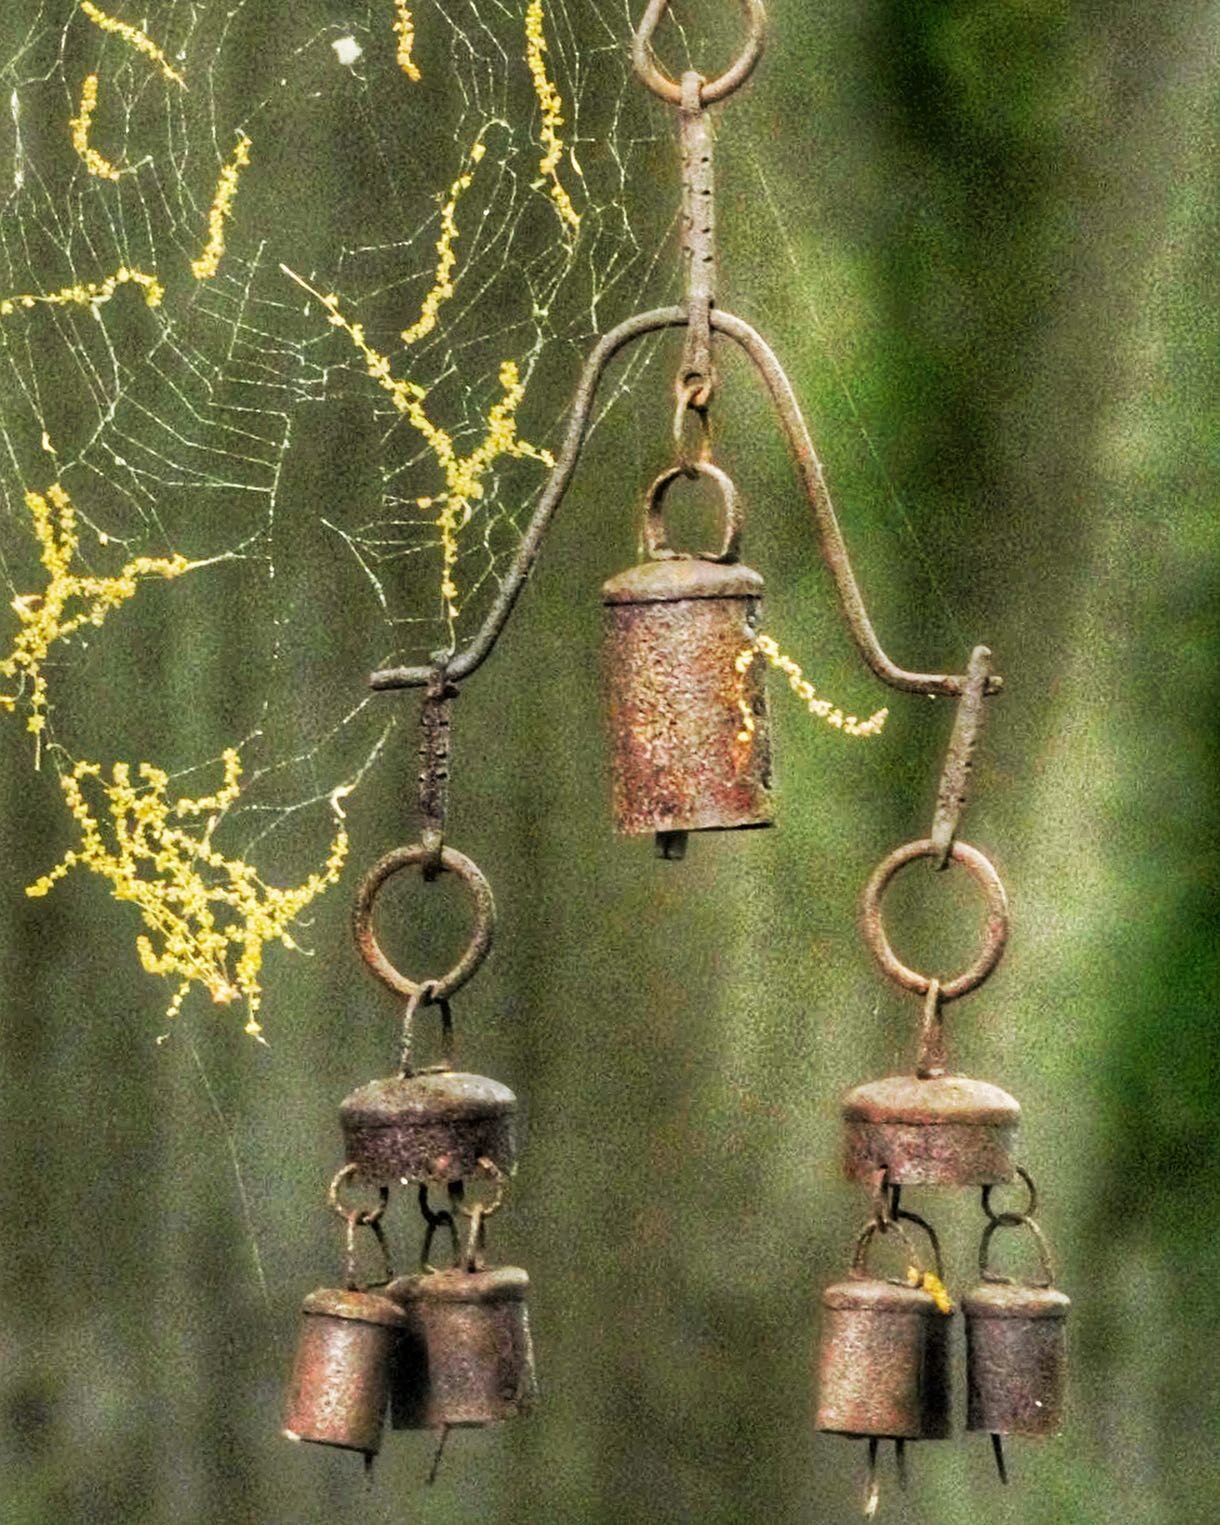 Wind chimes, spider web and oak flowers. 2023 camera with 55 year-old lens. Sony a7r V with Nikon 500mm f8 mirror lens.